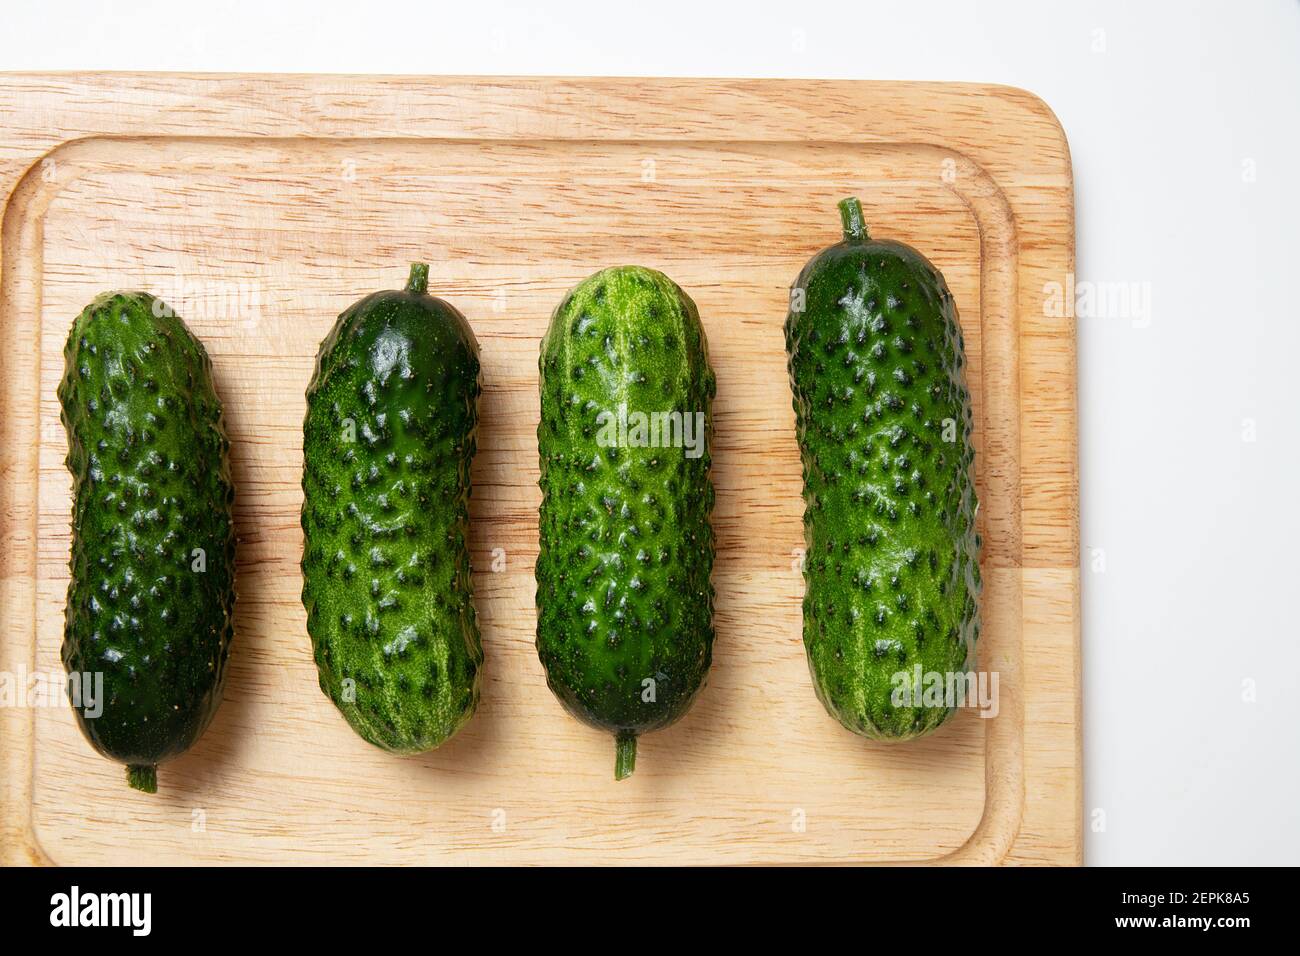 Group of green short cucumbers. Whole cucumbers on cutting board. Preparation ingredients for cooking or pickling Stock Photo